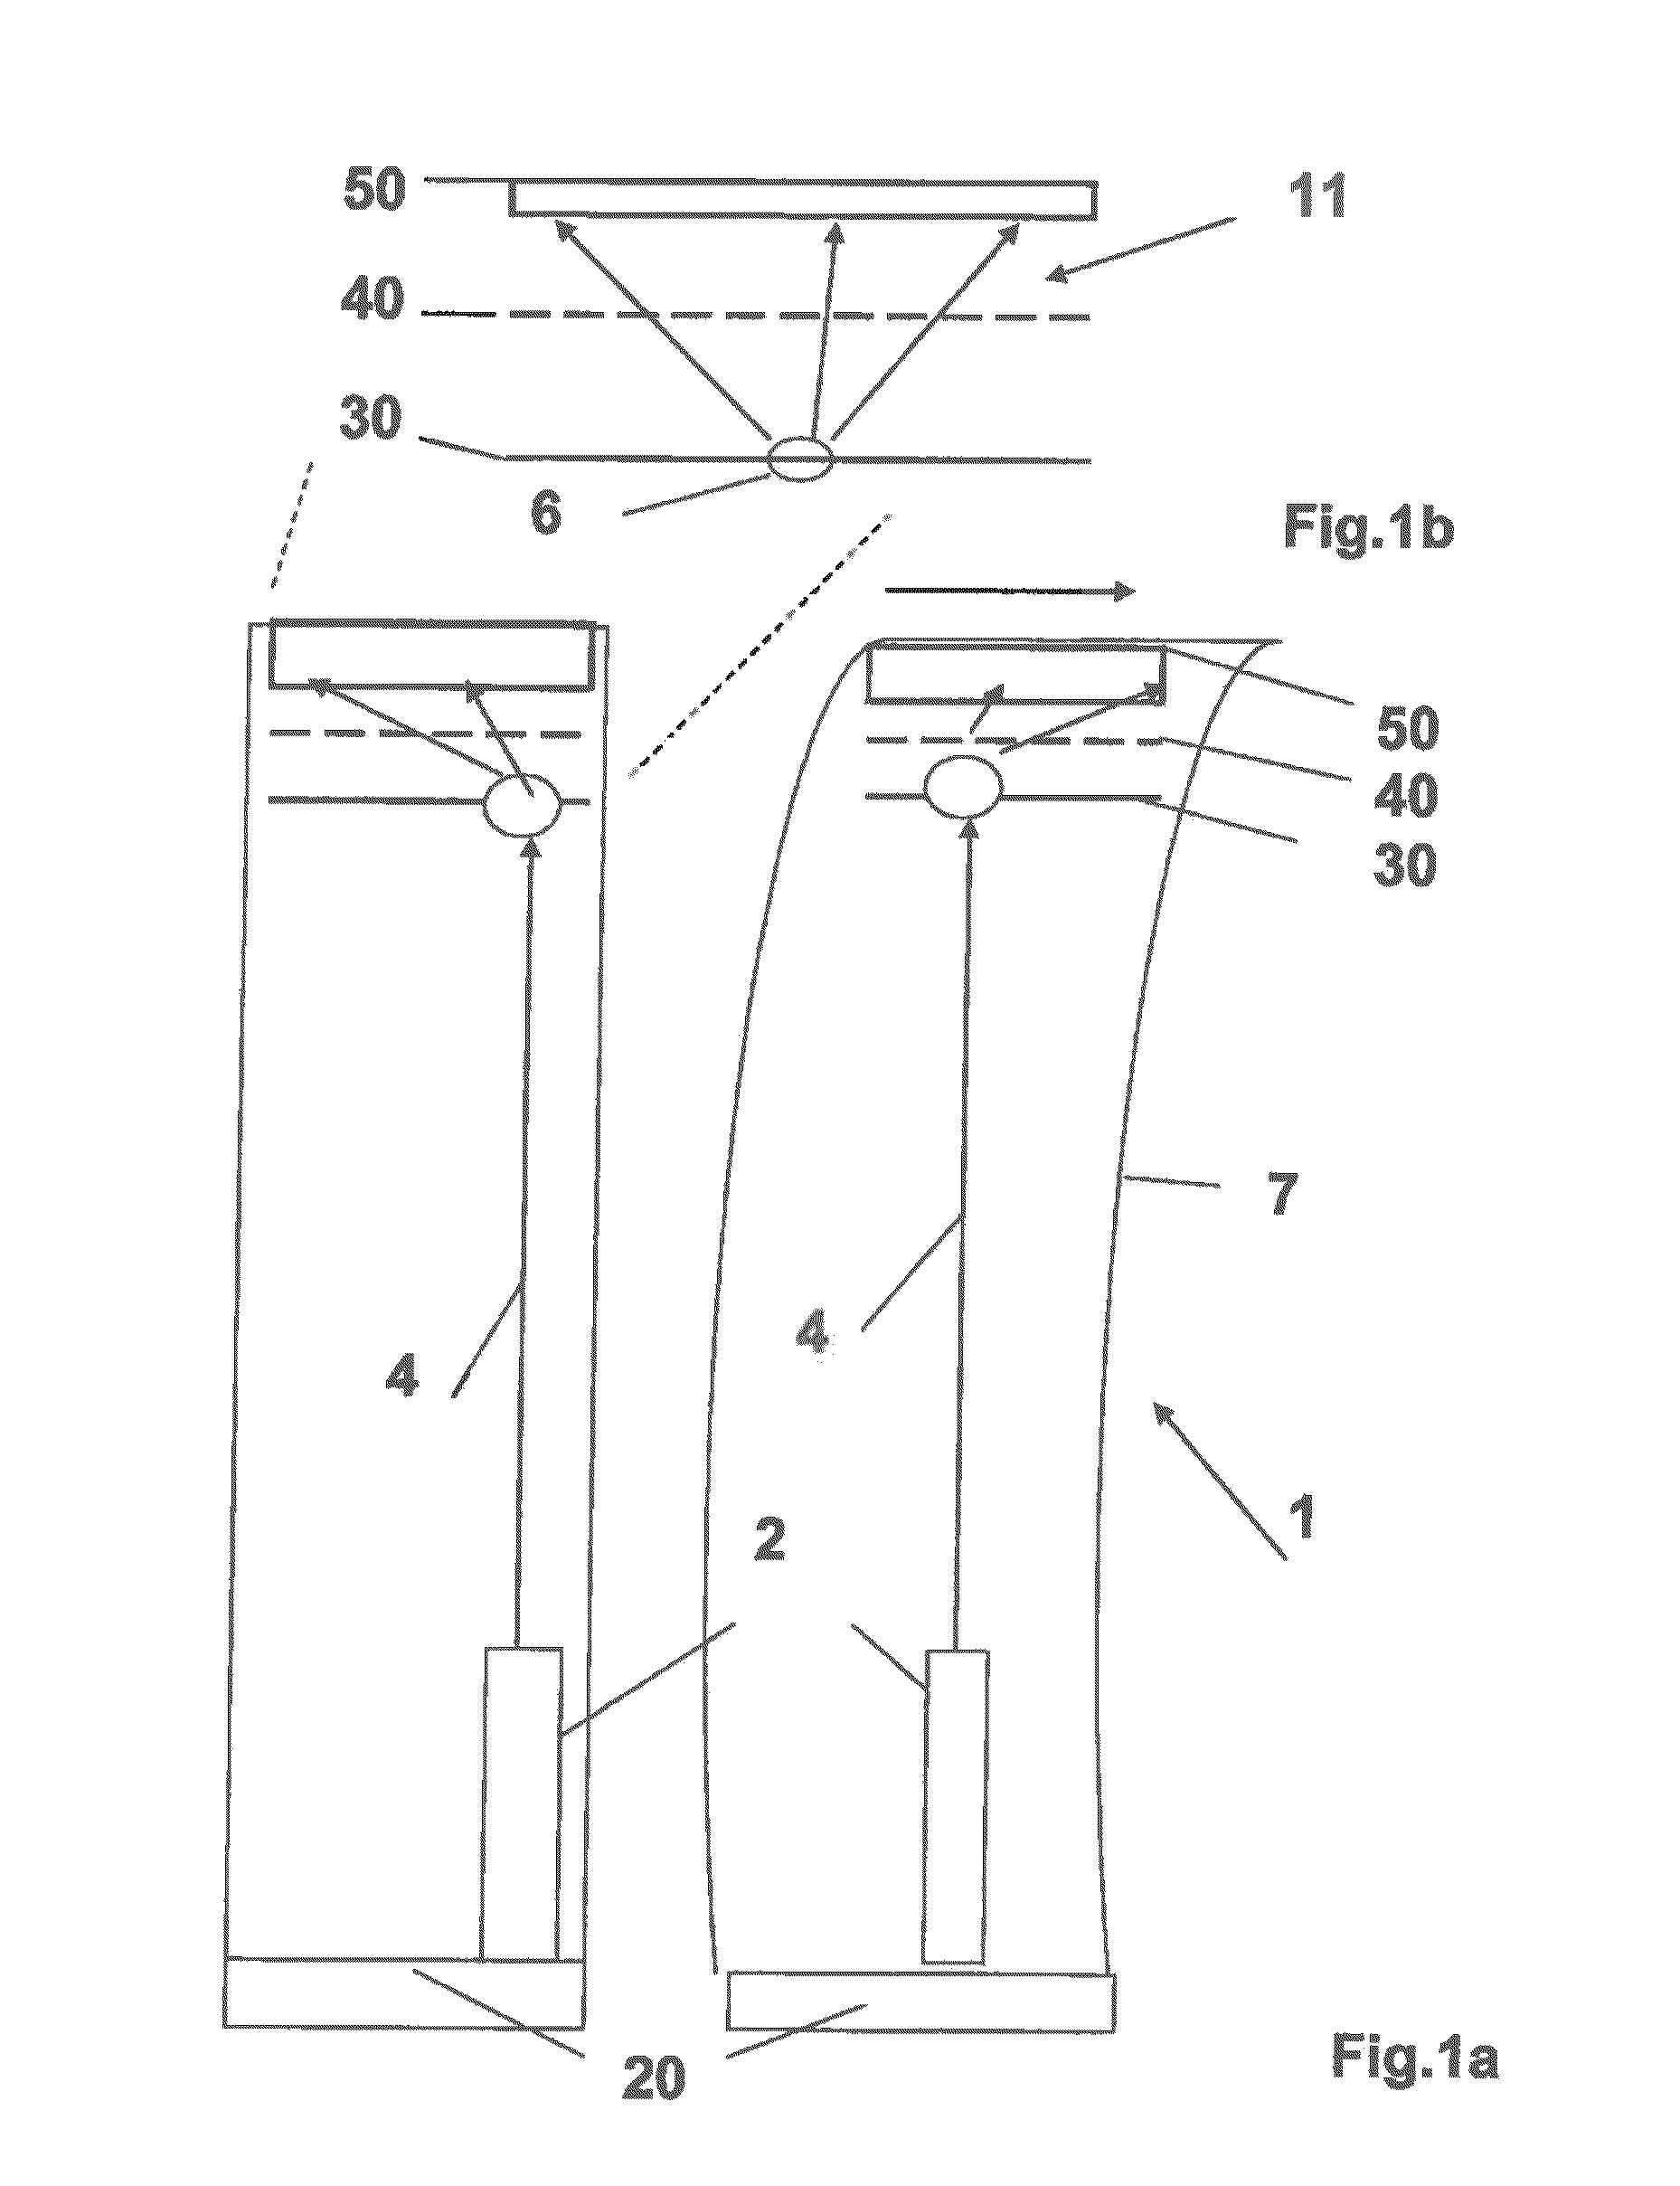 Positioning device comprising a light beam